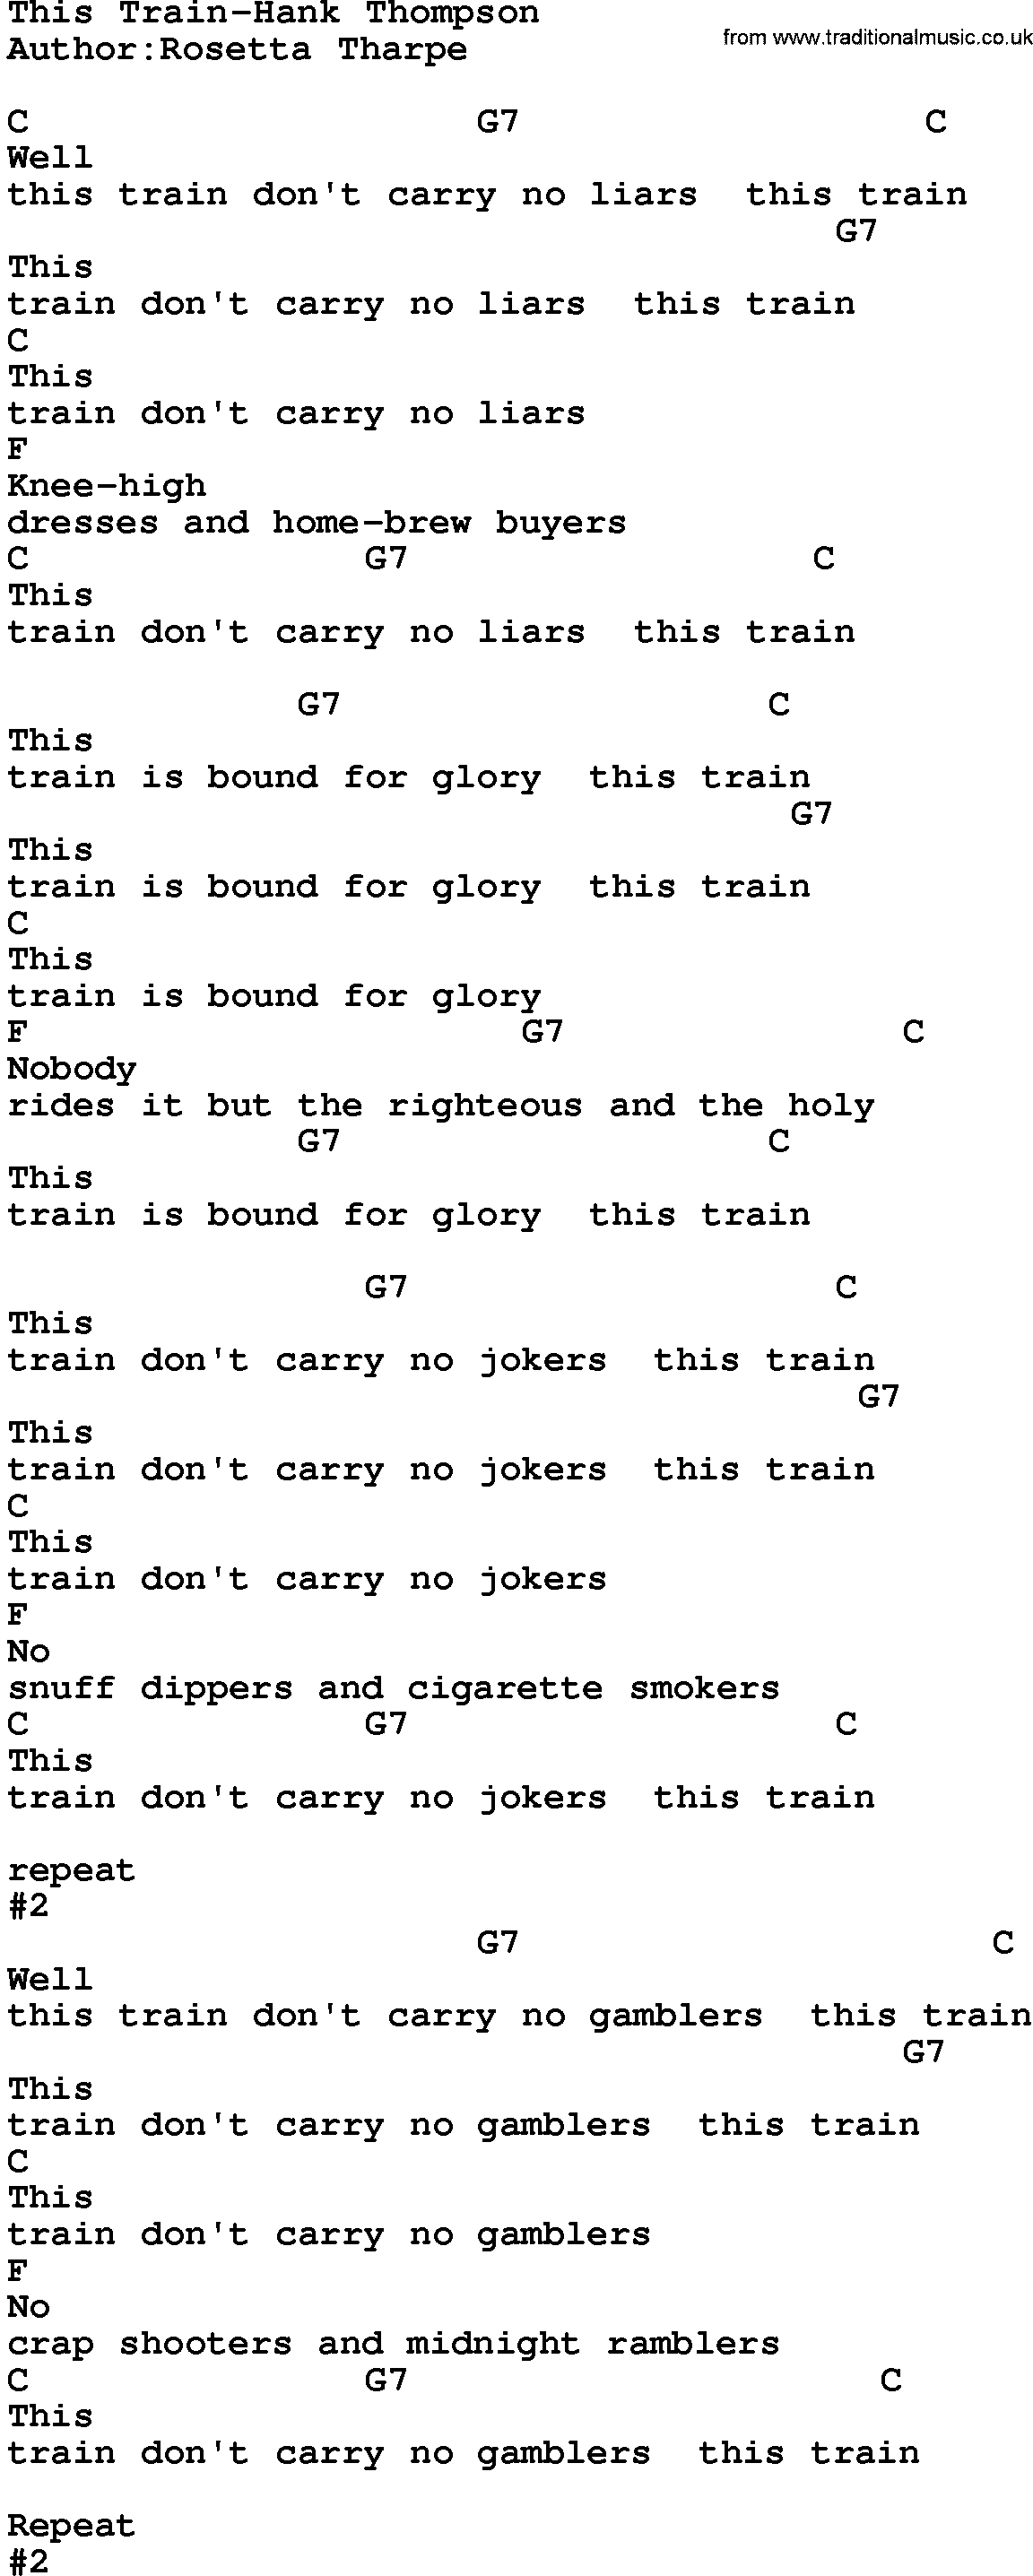 Country music song: This Train-Hank Thompson lyrics and chords